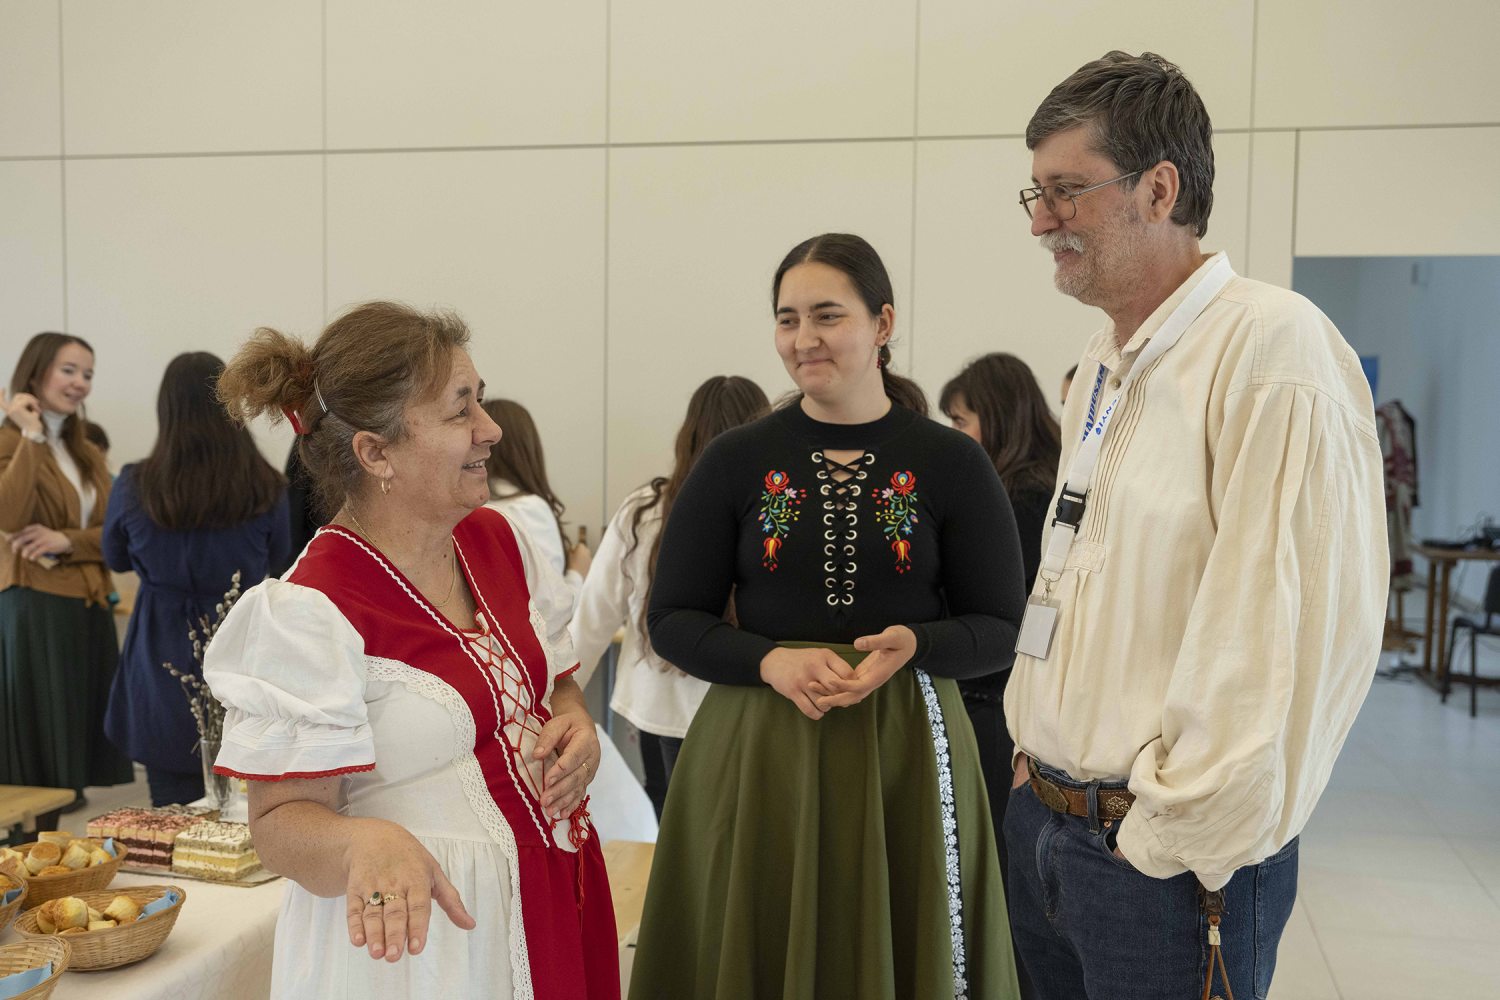 Two shepherdesses and Dr. Zsolt Molnár, the initiator of the event